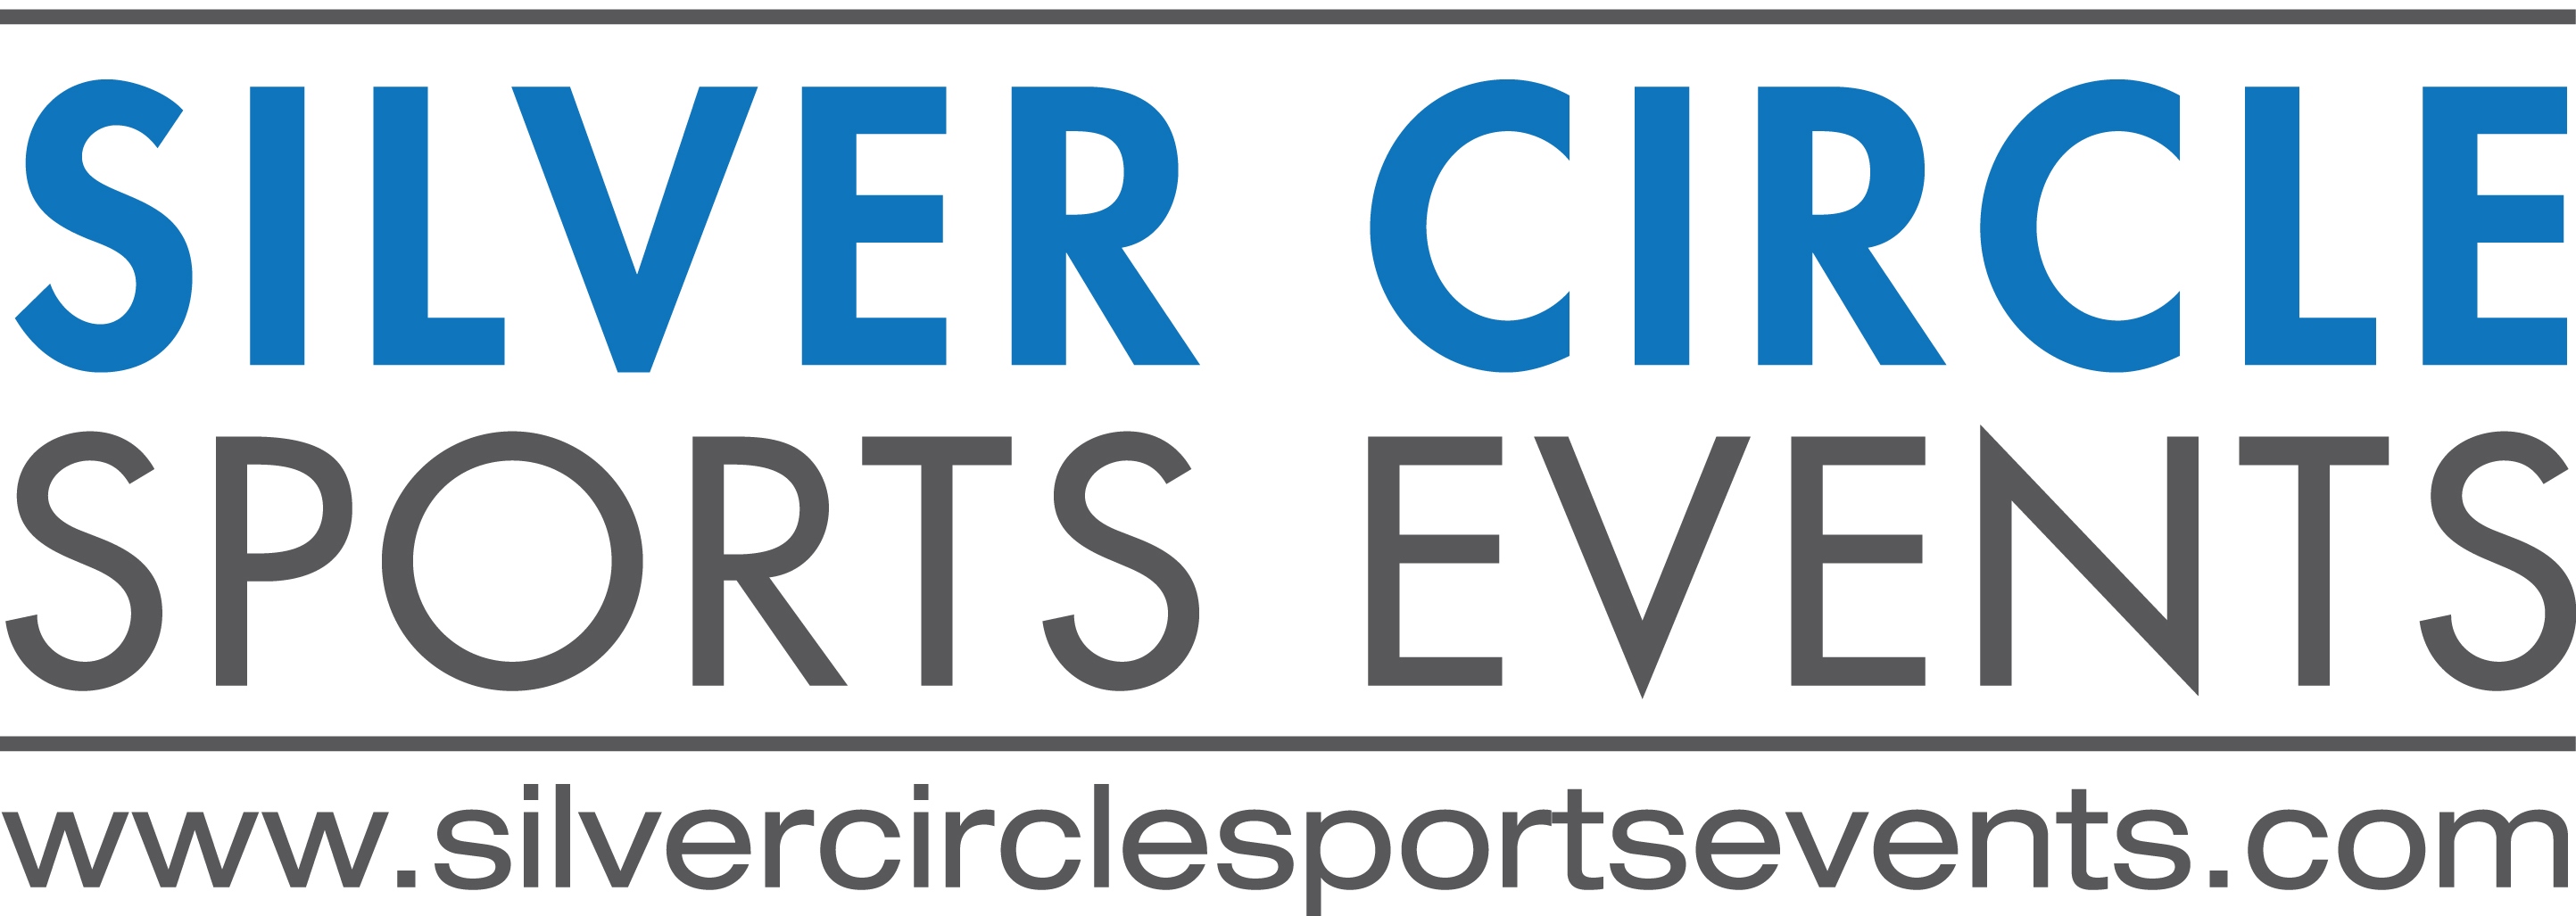 Silver Circle Sports Events